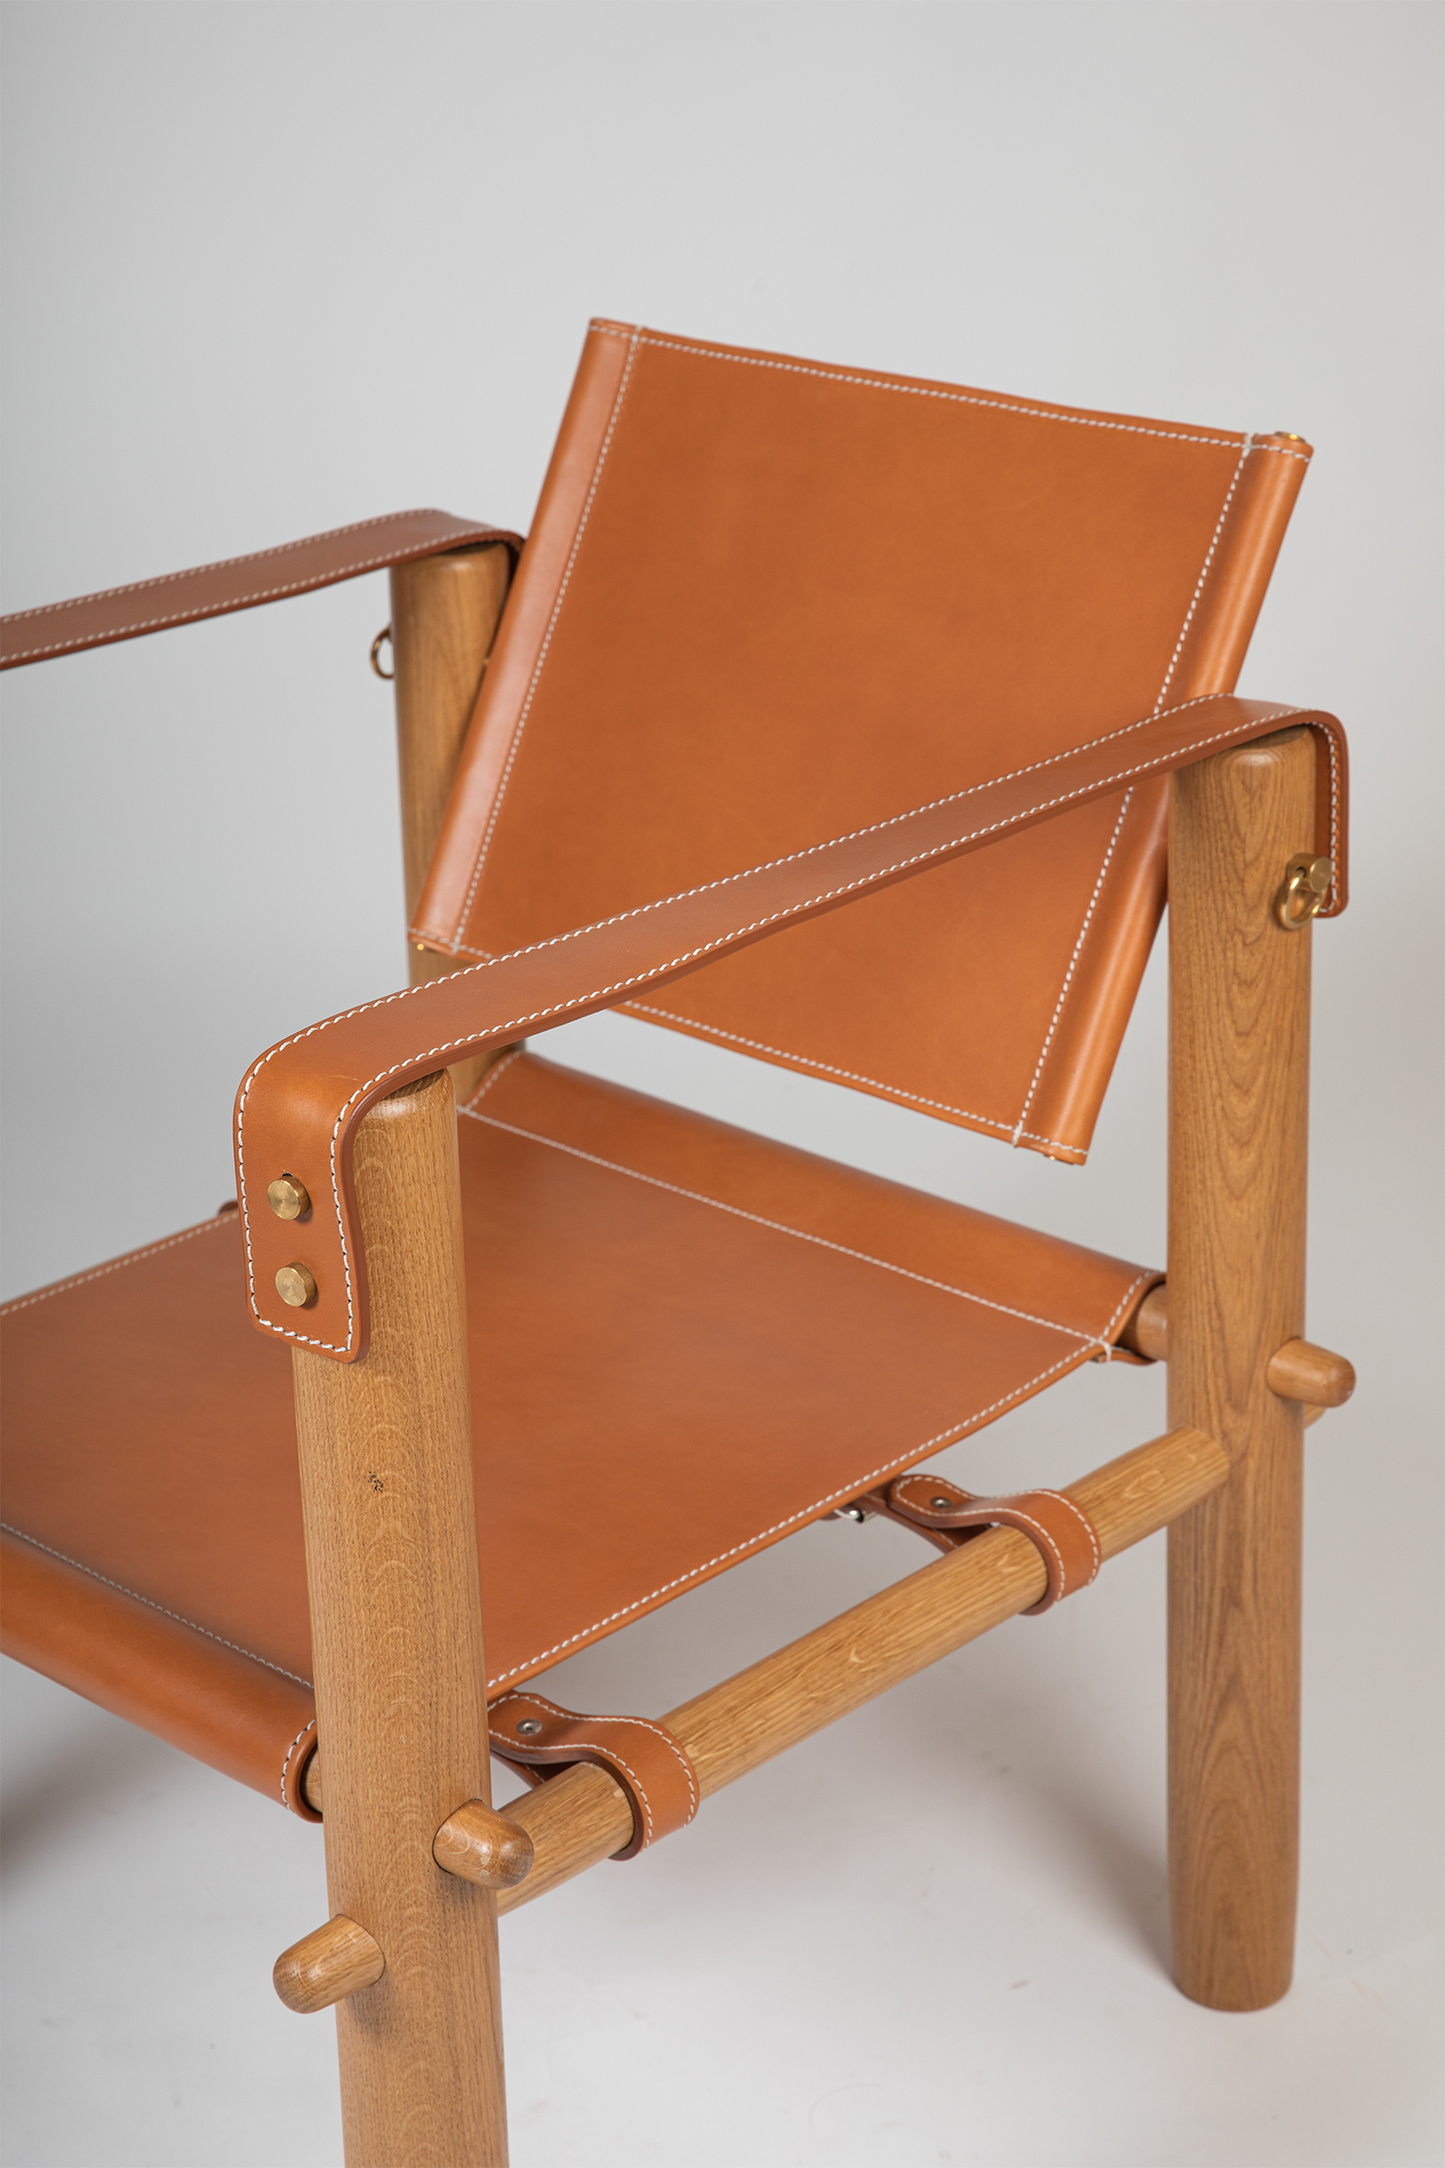 CÚBICA - Leather Chair with Wooden Structure by Antoni Bonet